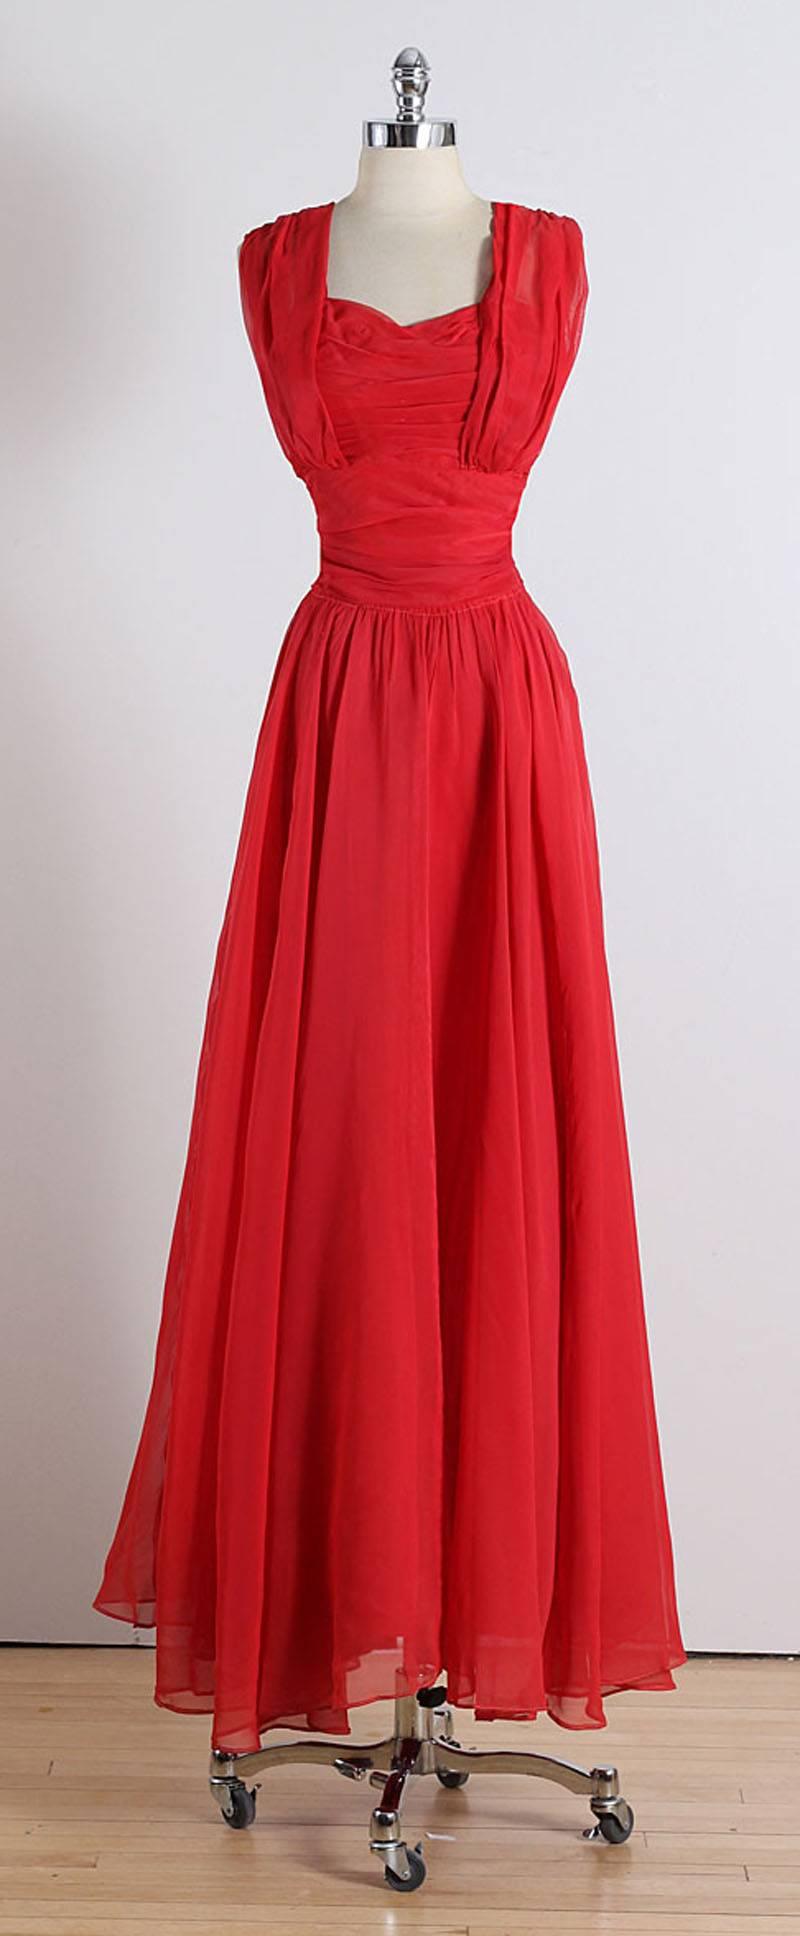 Vintage 1940s Emma Domb Red Chiffon Party Dress For Sale 4